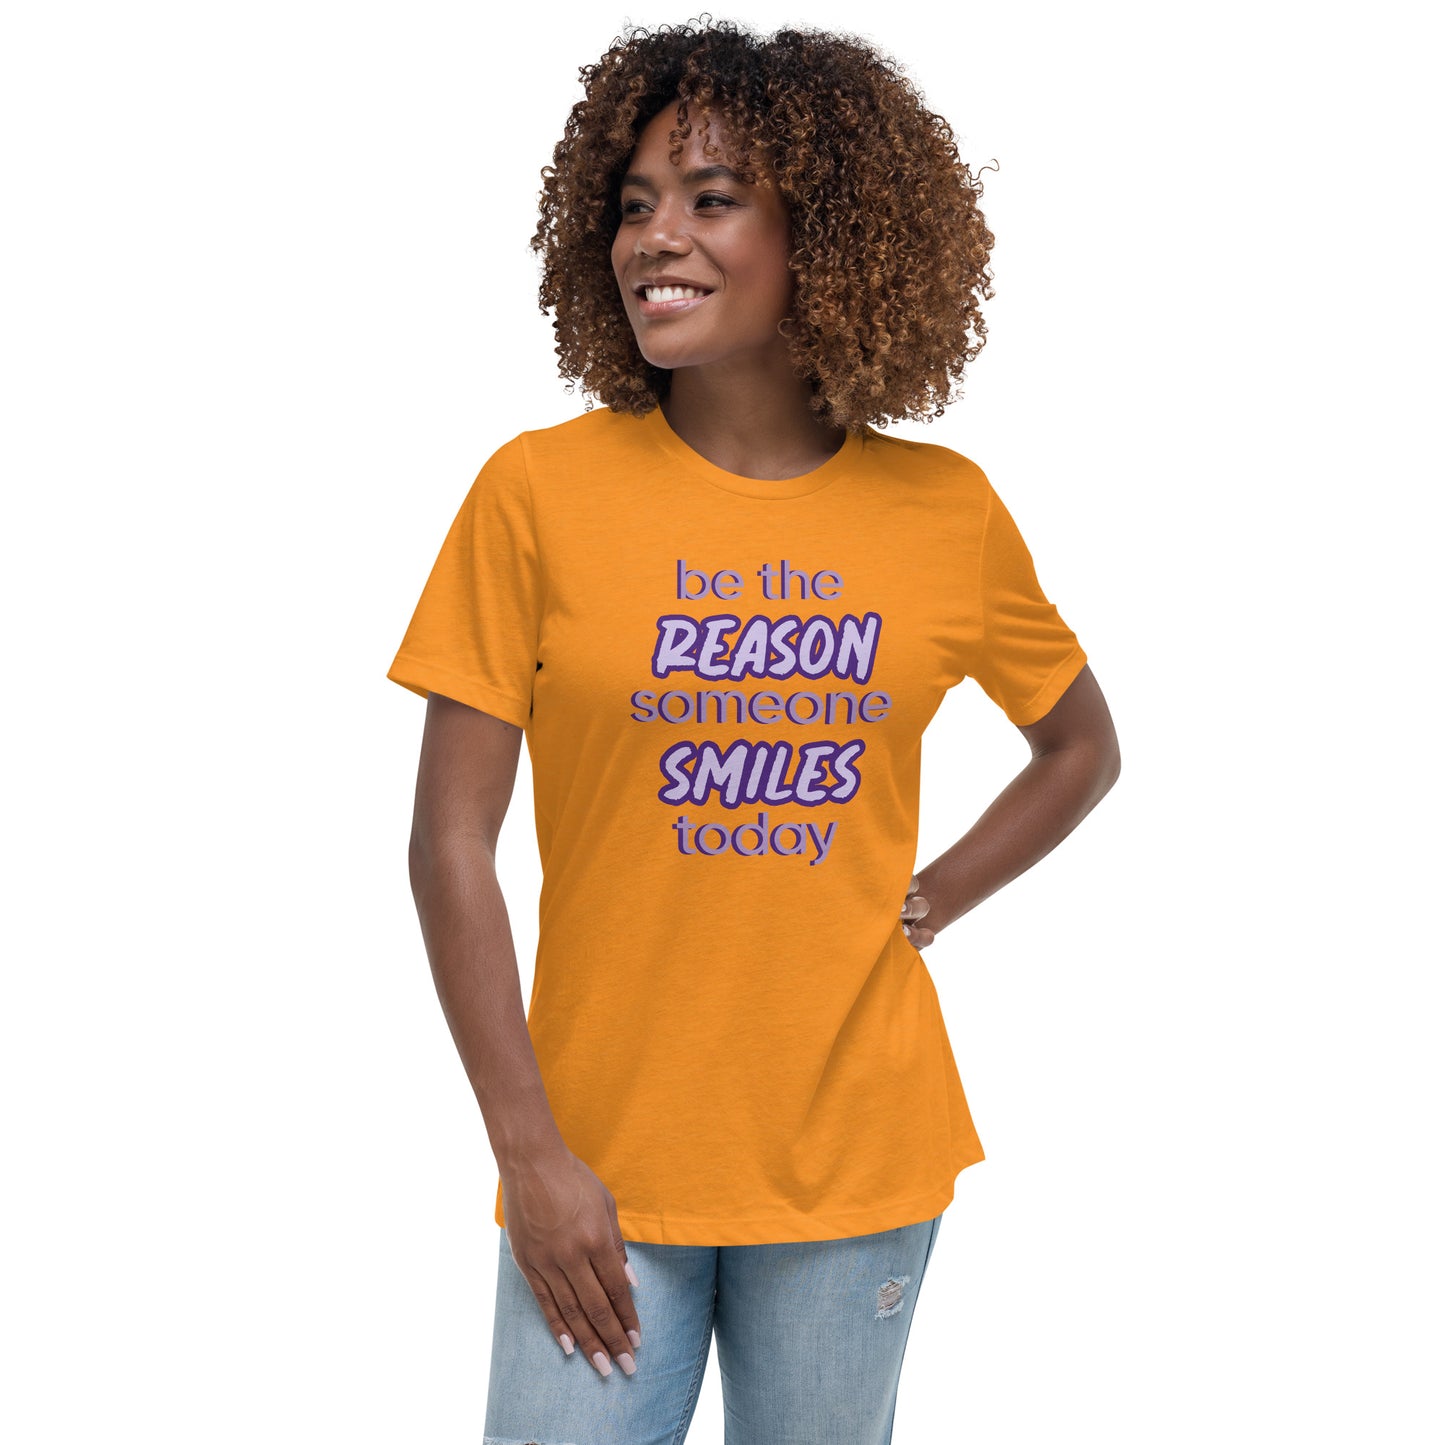 Woman with marmalade T-shirt and the quote "be the reason someone smiles today" in purple on it. 